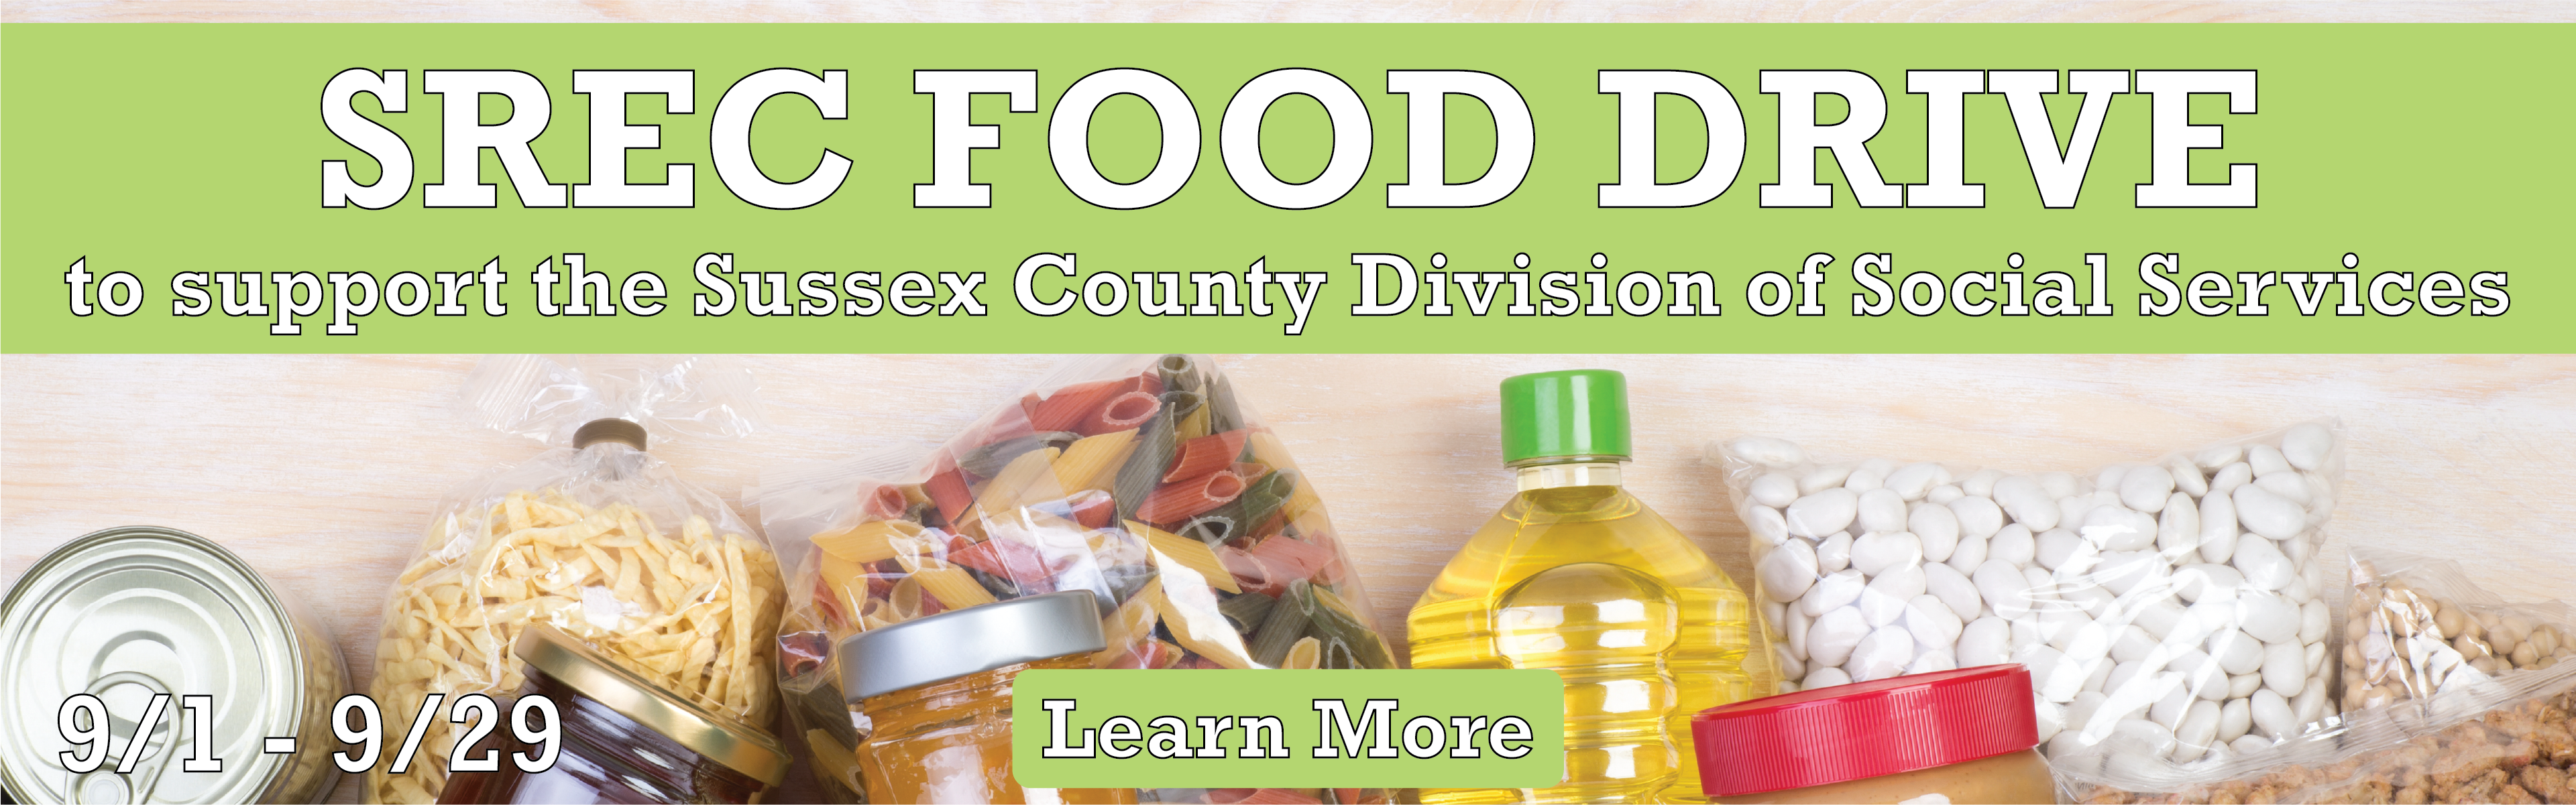 SREC FOOD DRIVE to support the Sussex County Division of Social Services. 9/1 - 9/29 Learn More